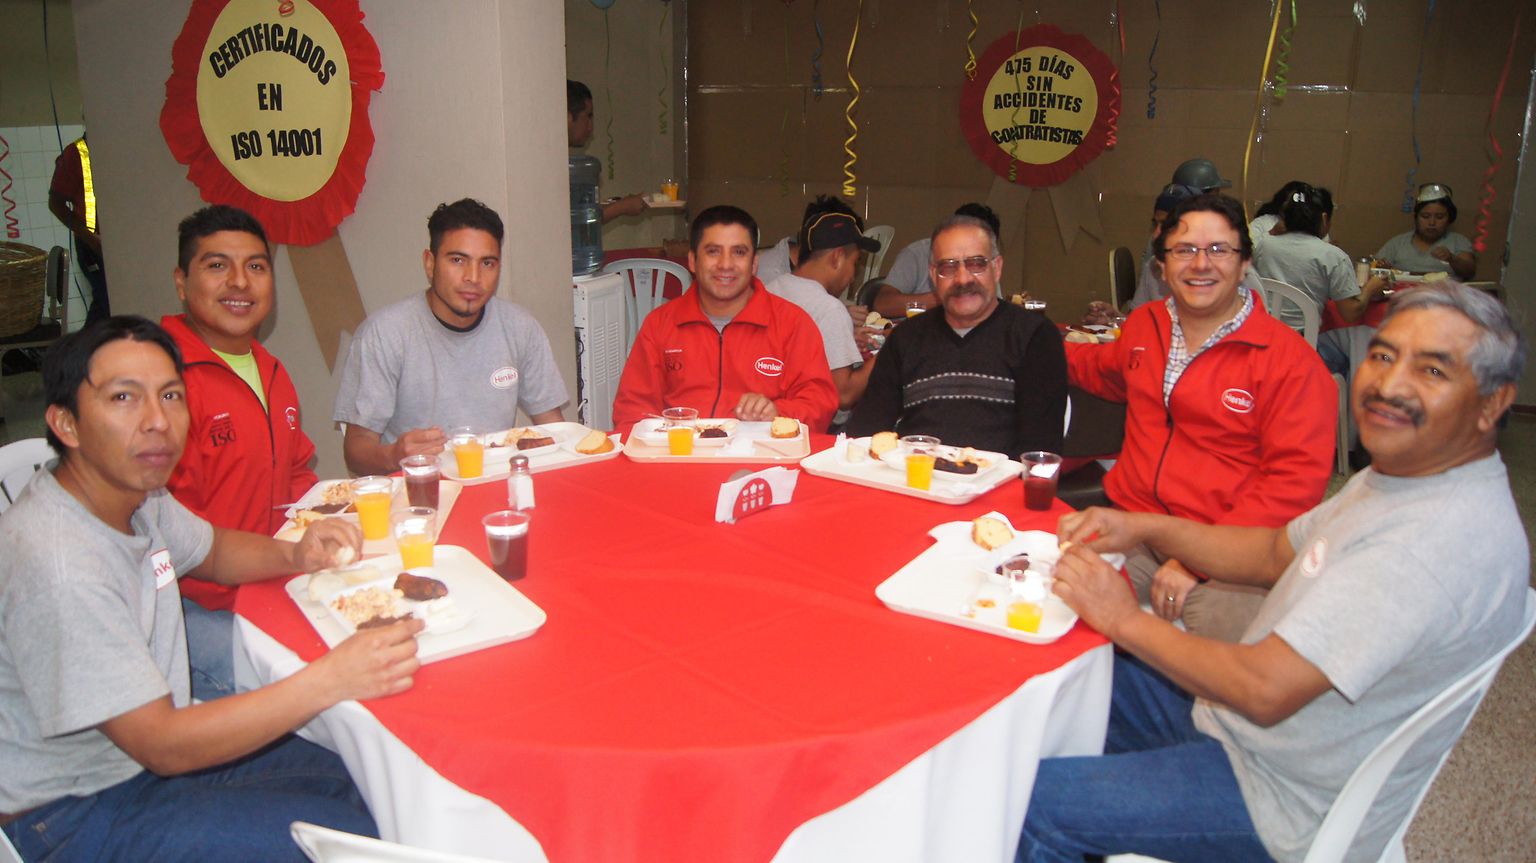 
As a way of thanking the employee a breakfast was held at the plant in Guatemala.